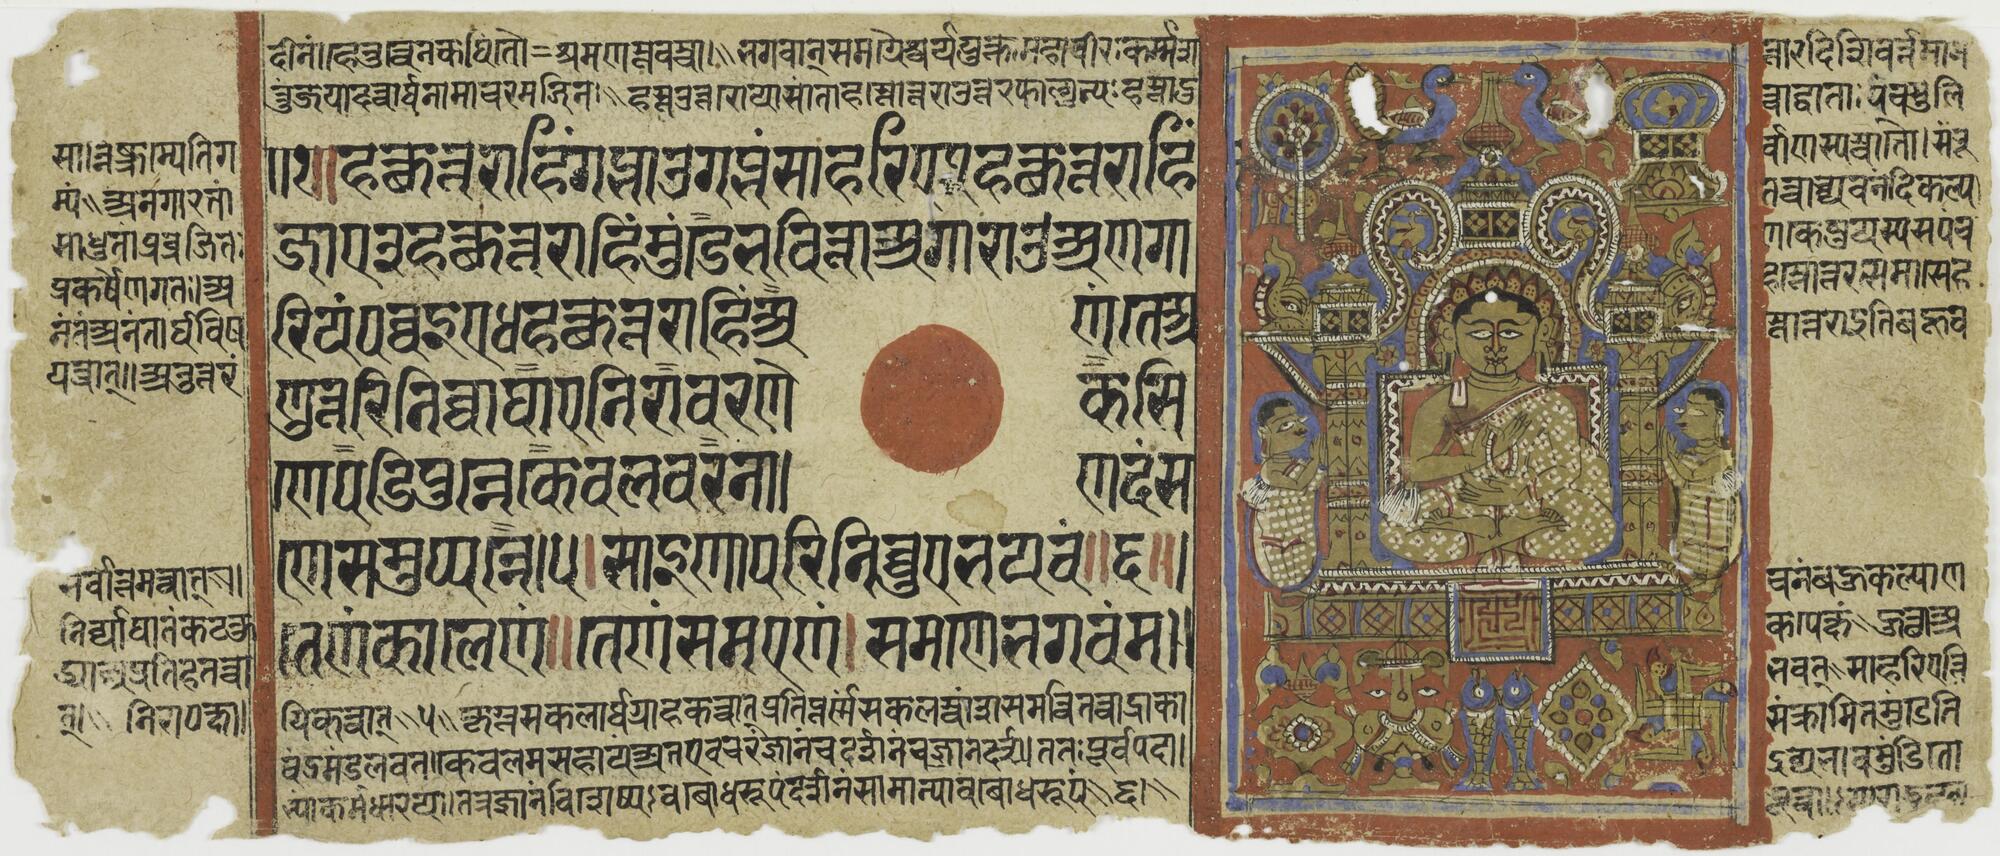 Leaf from a Kalpasutra manuscript with calligraphic text. Font size varies, and in the center of the leaf text wraps around a blank box of parchment with a red dot in the center. To the left of this main text block is a colorful illustration of an enthroned figure in a dotted robe flanked by devotees. Surrounding him are various auspicious symbols.